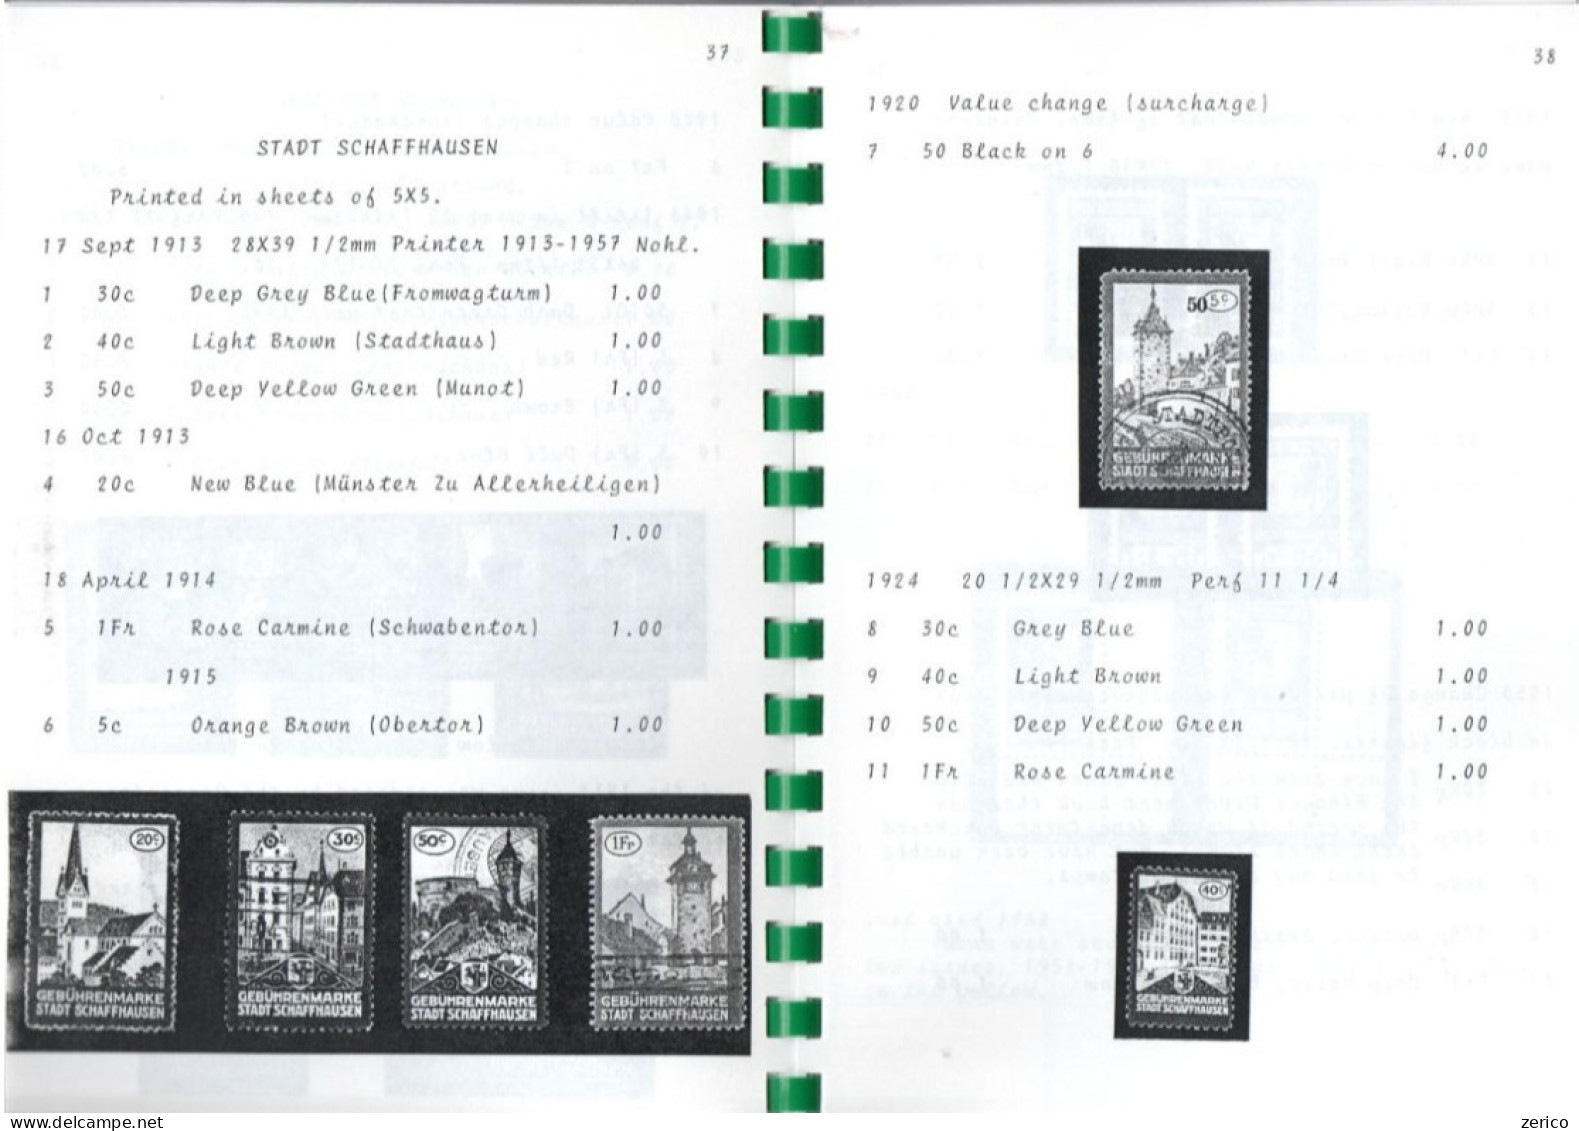 SUISSE Catalog Of The Fiscal Stamps Of The KANTONE And GEMEINDEN Of Switzerland, By Gene Kellys, édi 1986 USA 118 Pages - Fiscali